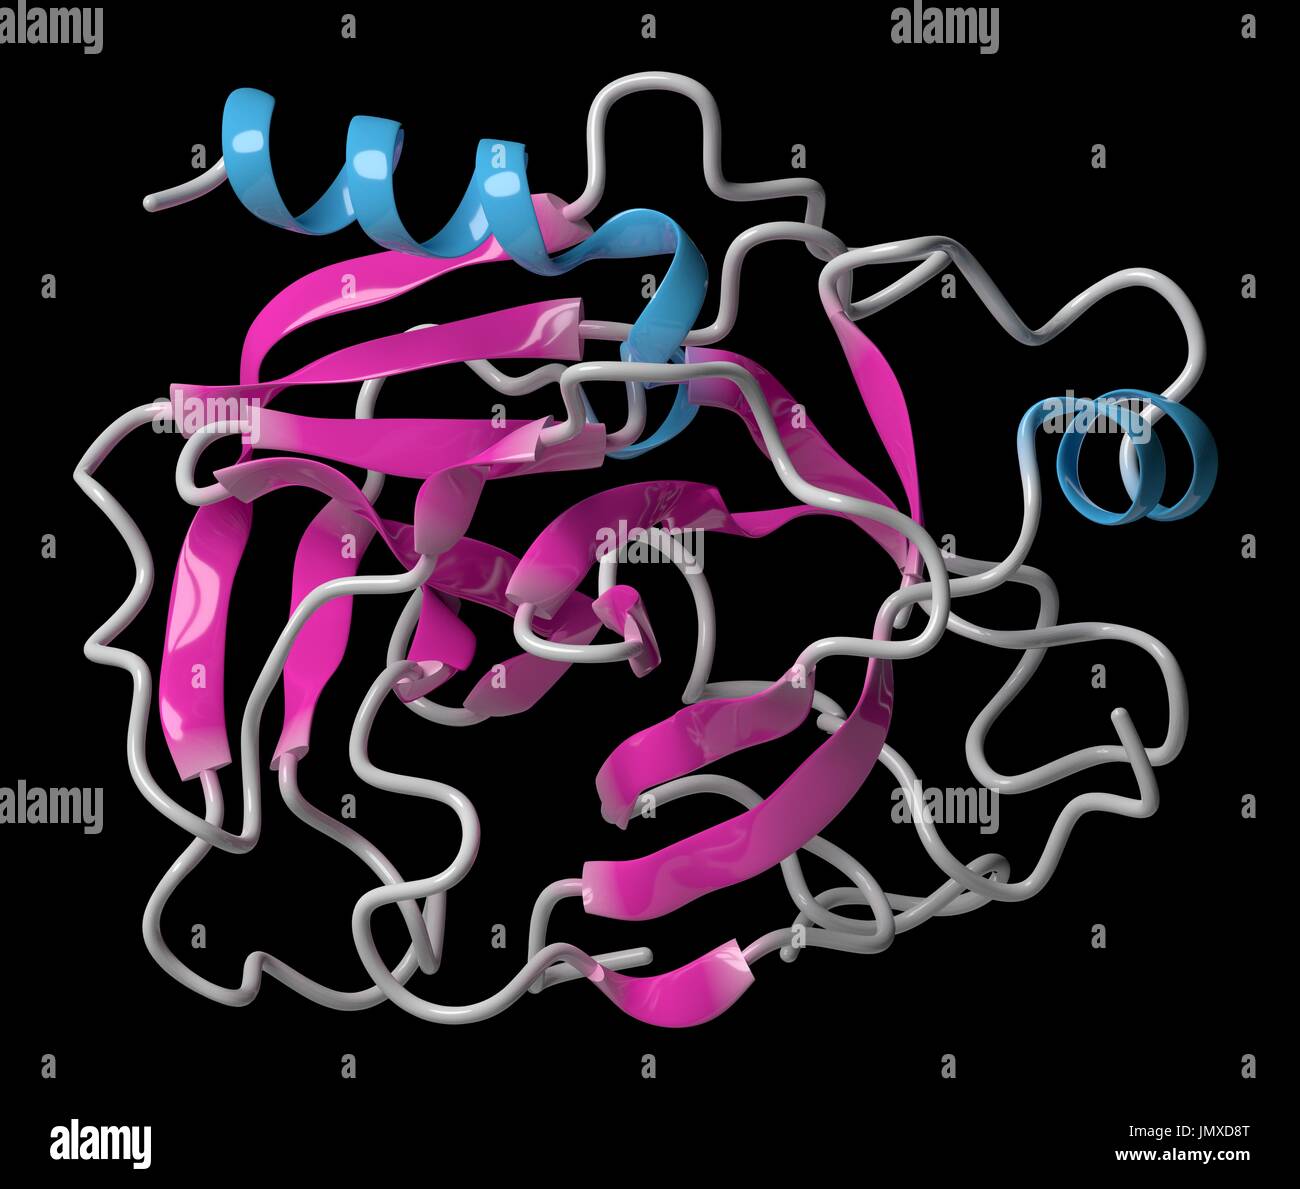 Trypsin digestive enzyme molecule (human). Enzyme that contributes to the digestion of proteins in the digestive system. Cartoon model, secondary structure colouring (helices blue, sheets pink). Stock Photo